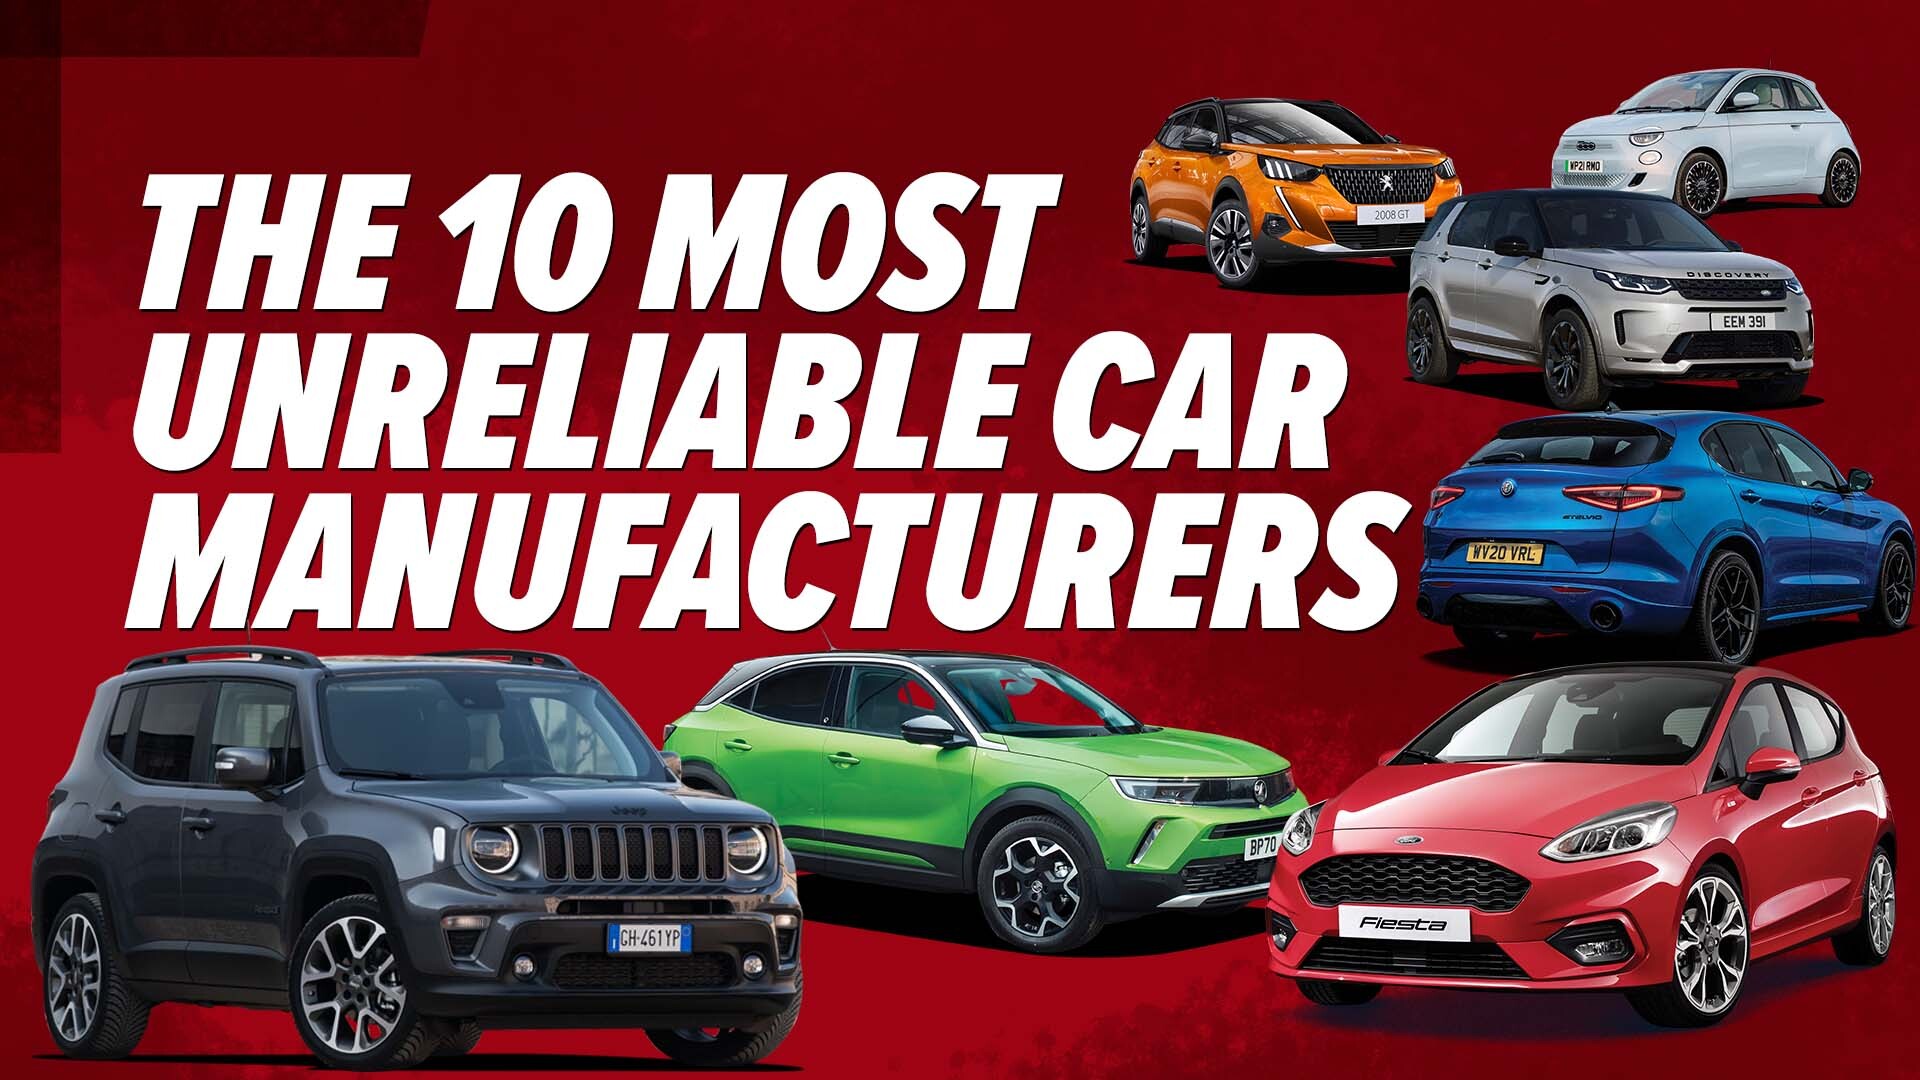 jeep-named-the-most-unreliable-used-car-brand-as-top-10-worst